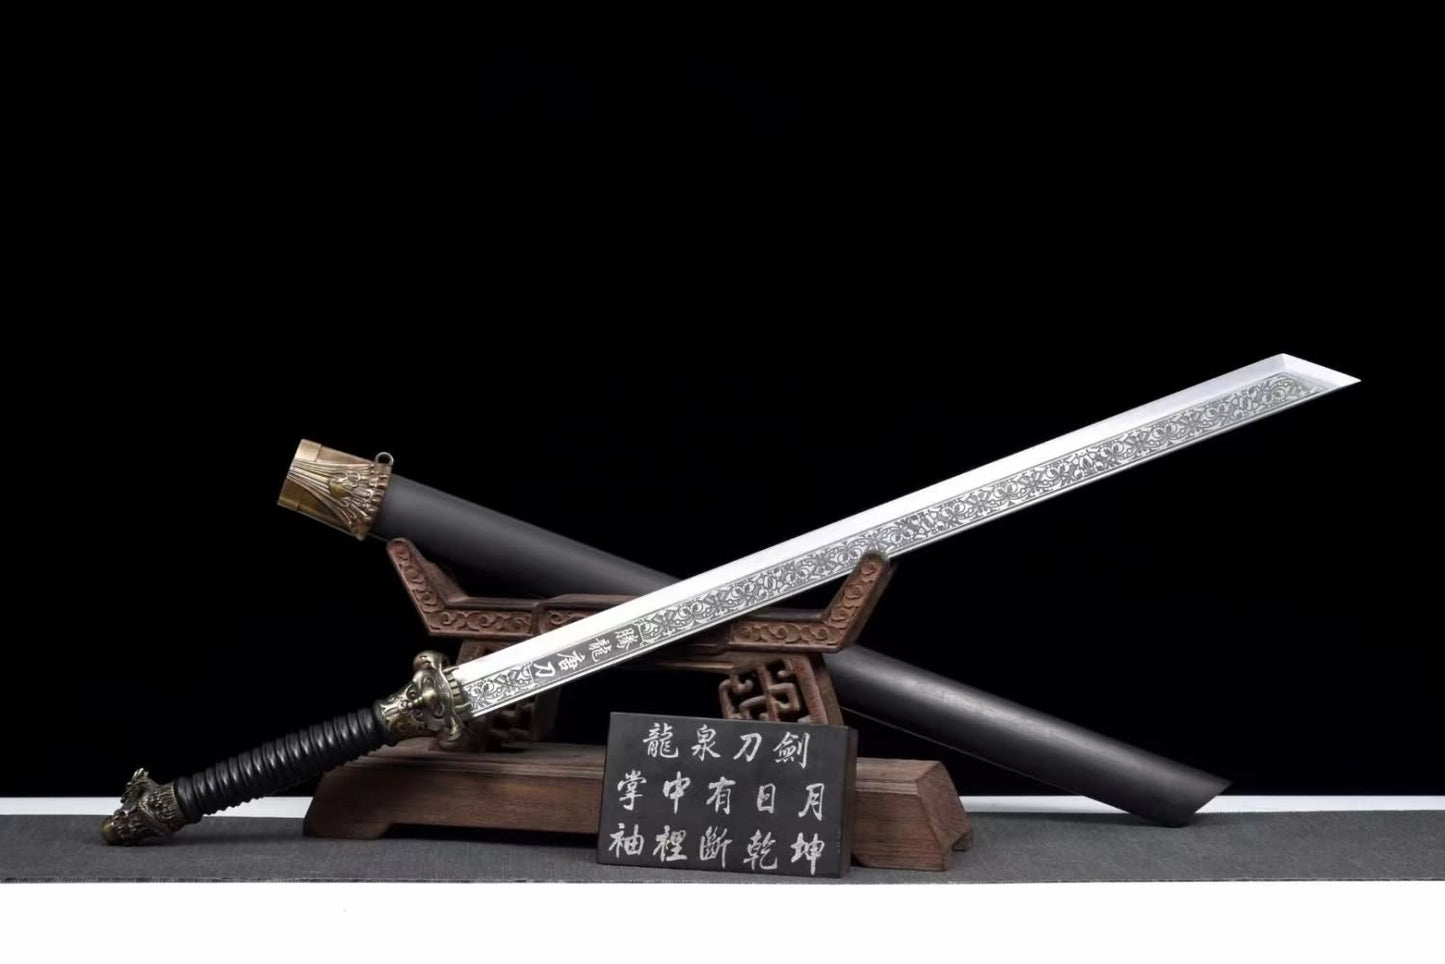 Dragon Tang dao with Forged High Carbon Steel Etched Blade-Black Wood Scabbard